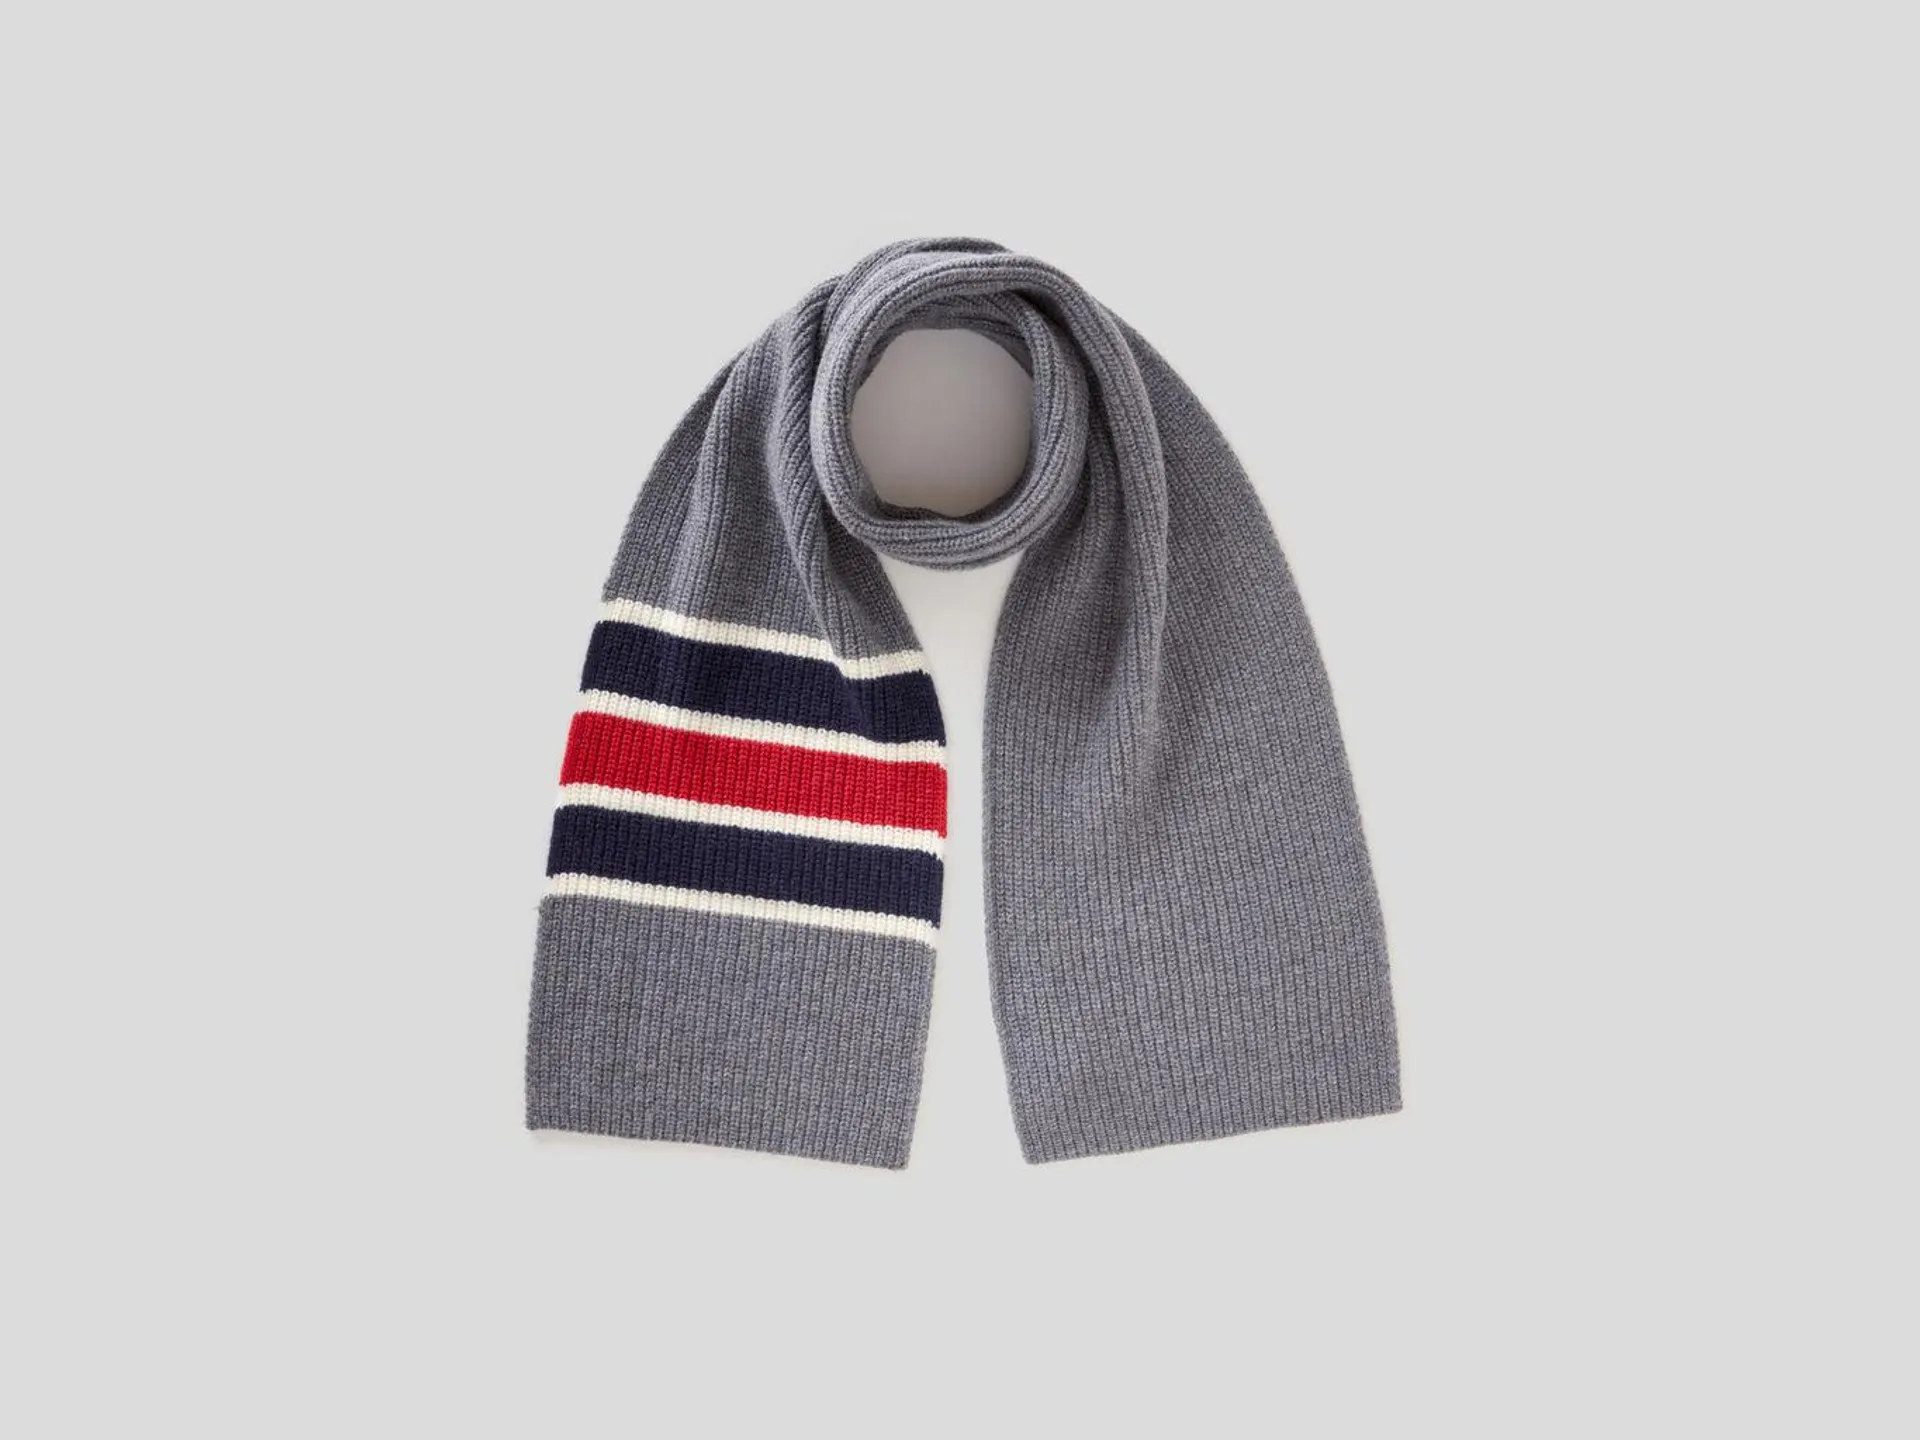 College-style scarf